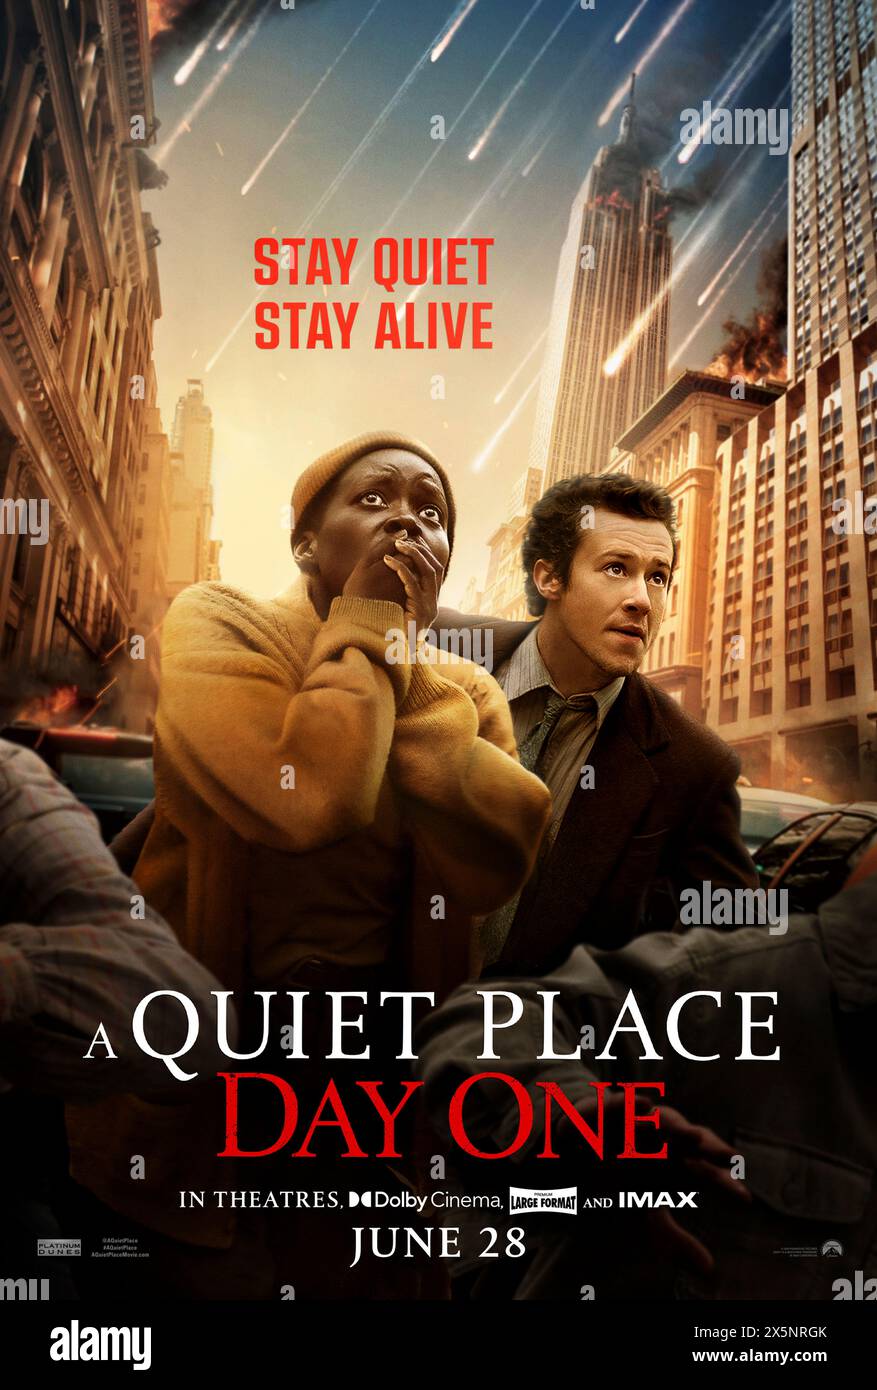 A Quiet Place: Day One (2024) directed by Michael Sarnoski and starring Djimon Hounsou, Joseph Quinn and Alex Wolff. Hear how it all began and experience the day the world went quiet. US advance poster.***EDITORIAL USE ONLY*** Credit: BFA / Paramount Pictures Stock Photo